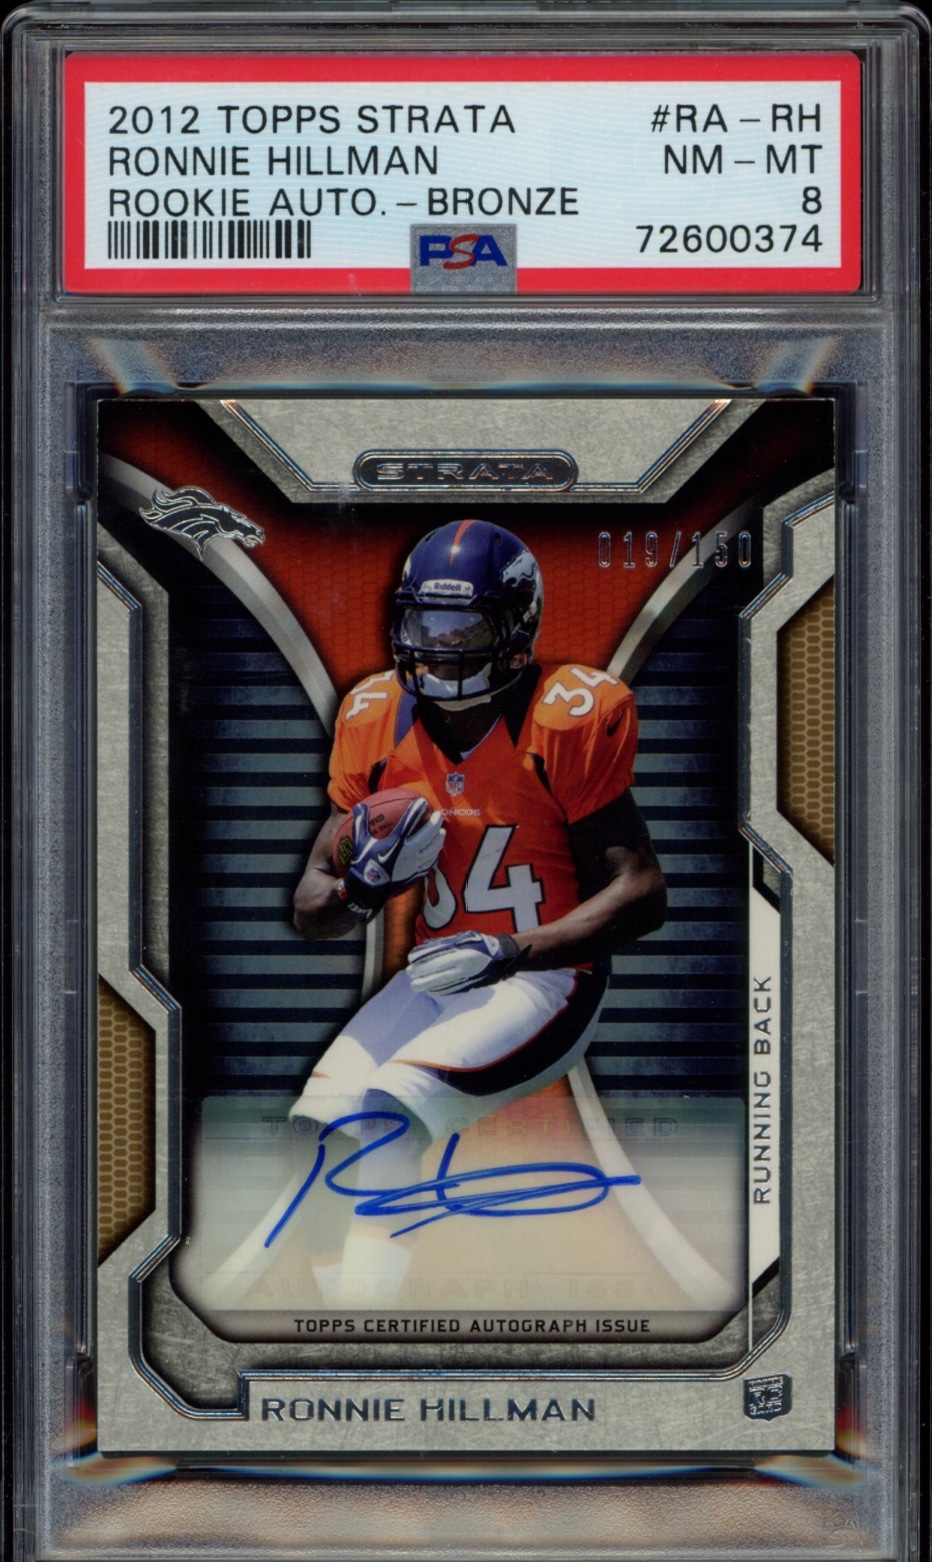 2012 Topps Strata Ronnie Hillman rookie card with signature, Denver Broncos #34, graded NM-MT 8.